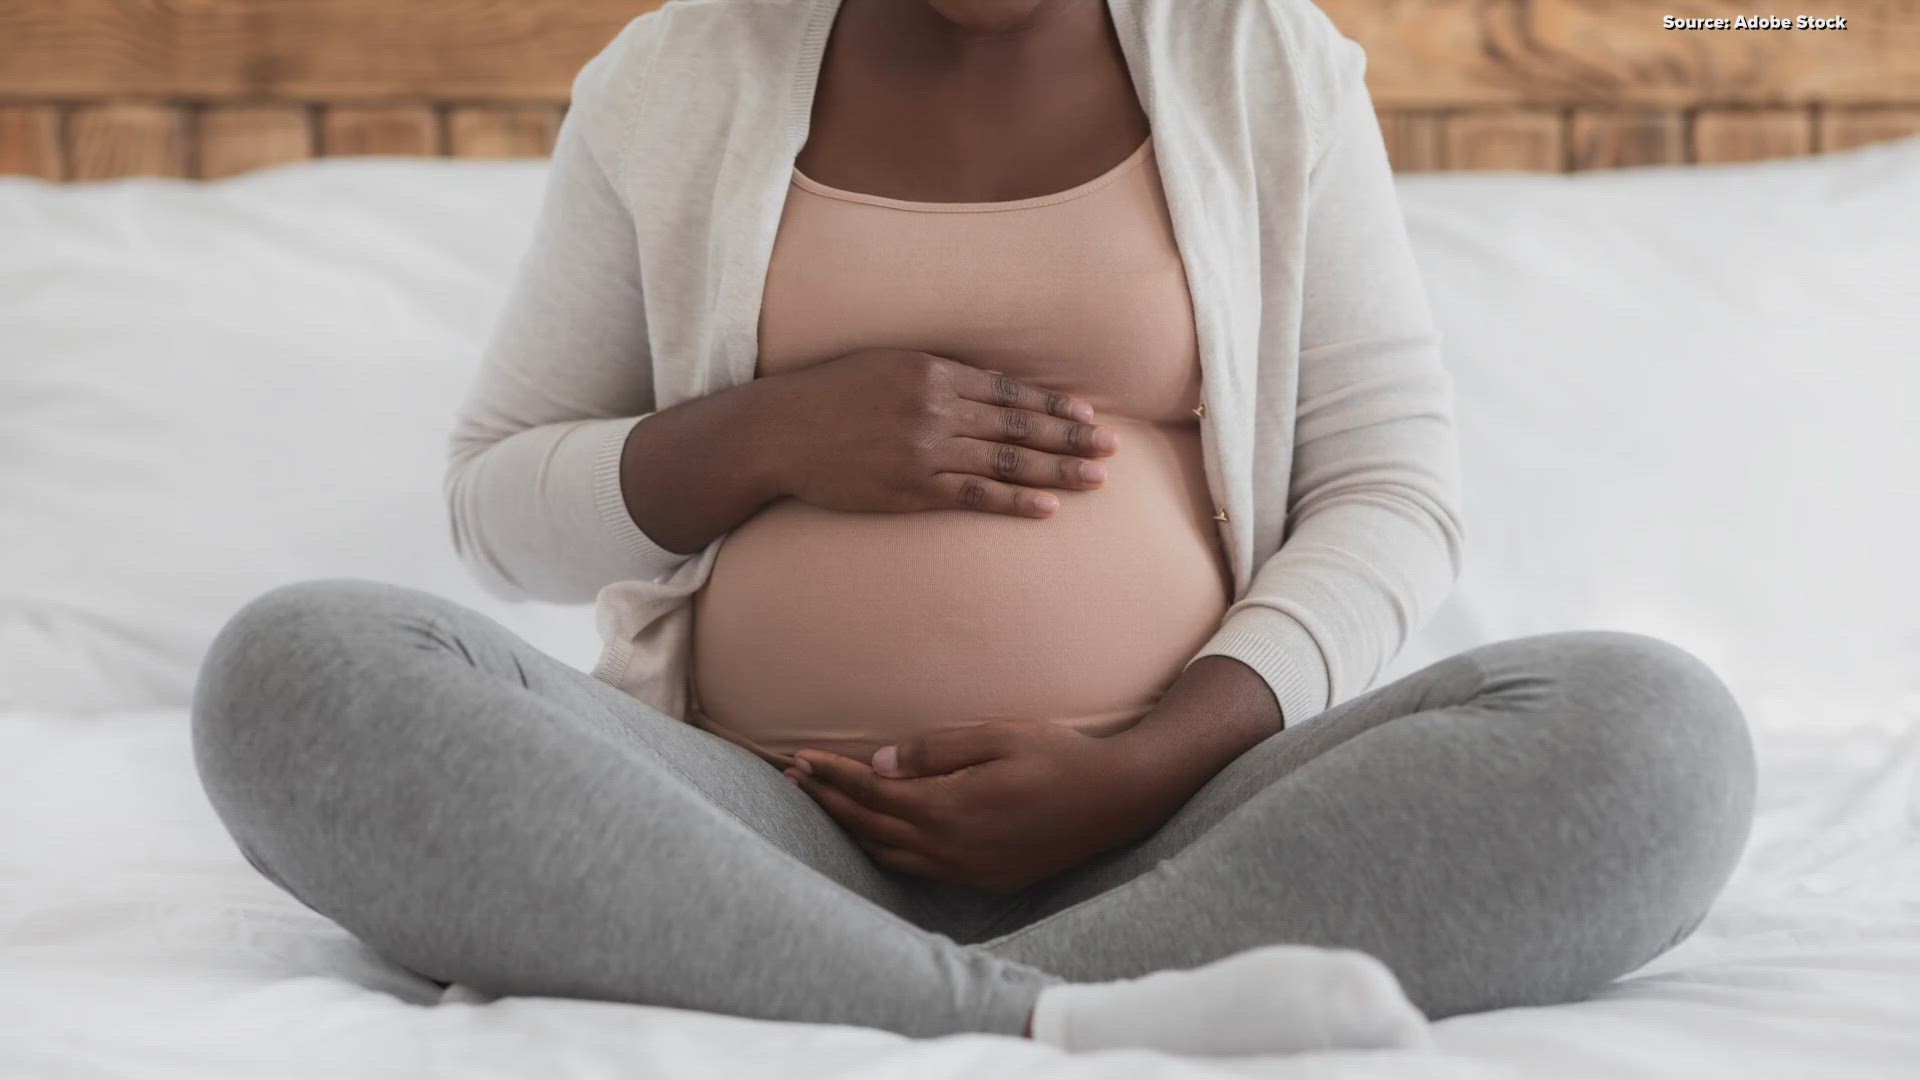 Black women are three times more likely to die from pregnancy complications. The Black Maternal Health Conference is hoping to educate and help reduce that number.